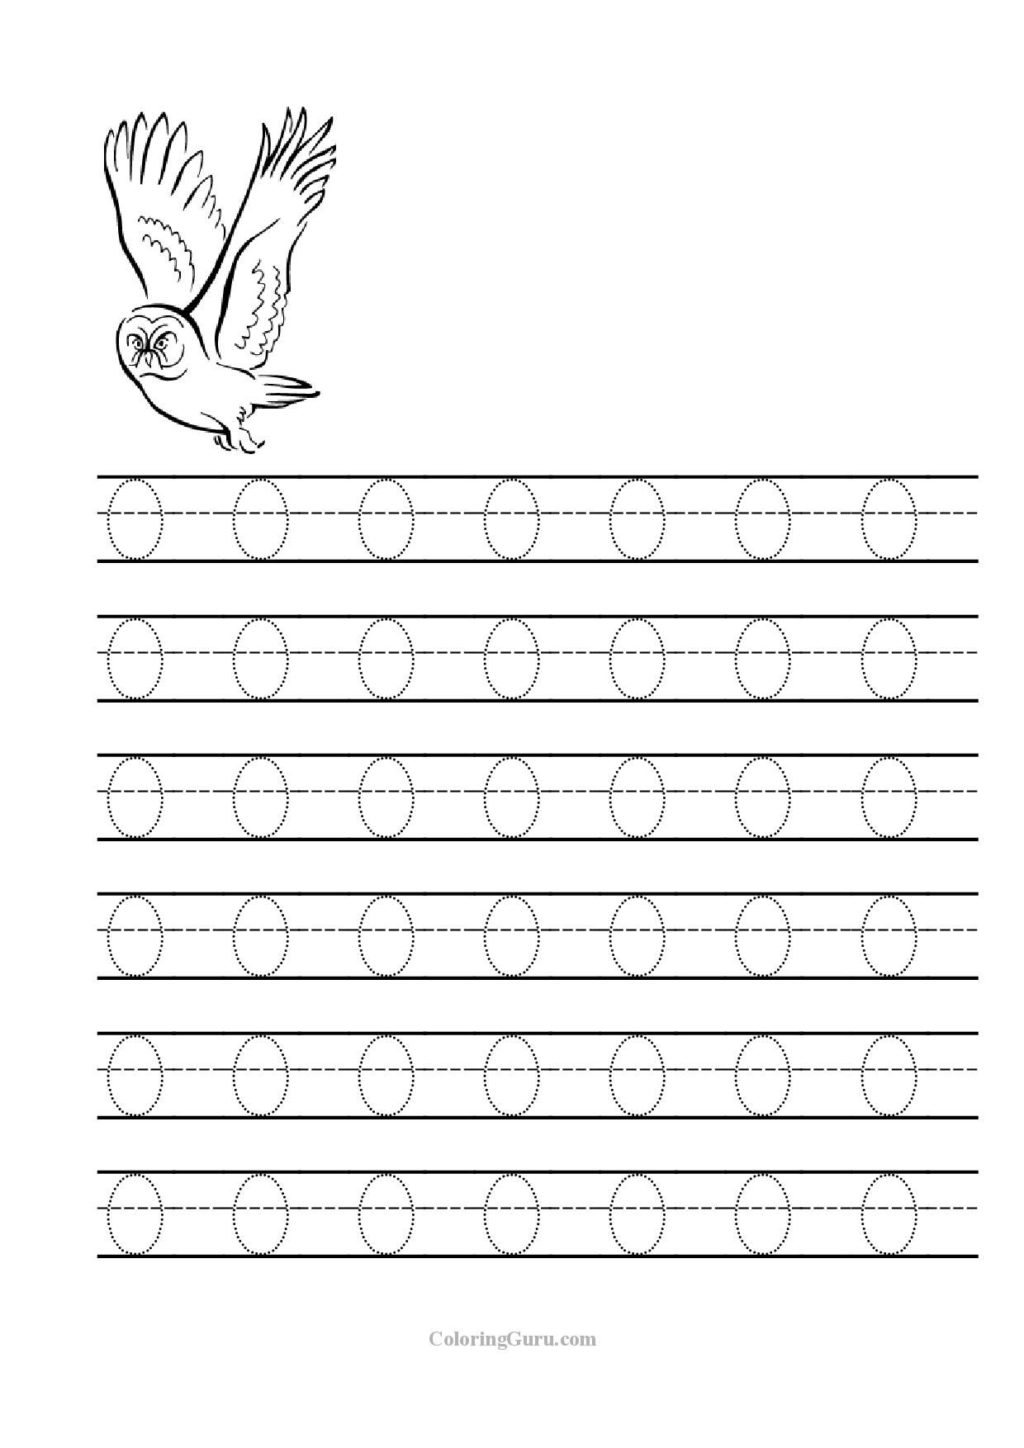 Worksheet ~ Fantastic Letters For Pre K Free Printable with regard to Letter O Tracing Worksheets Preschool